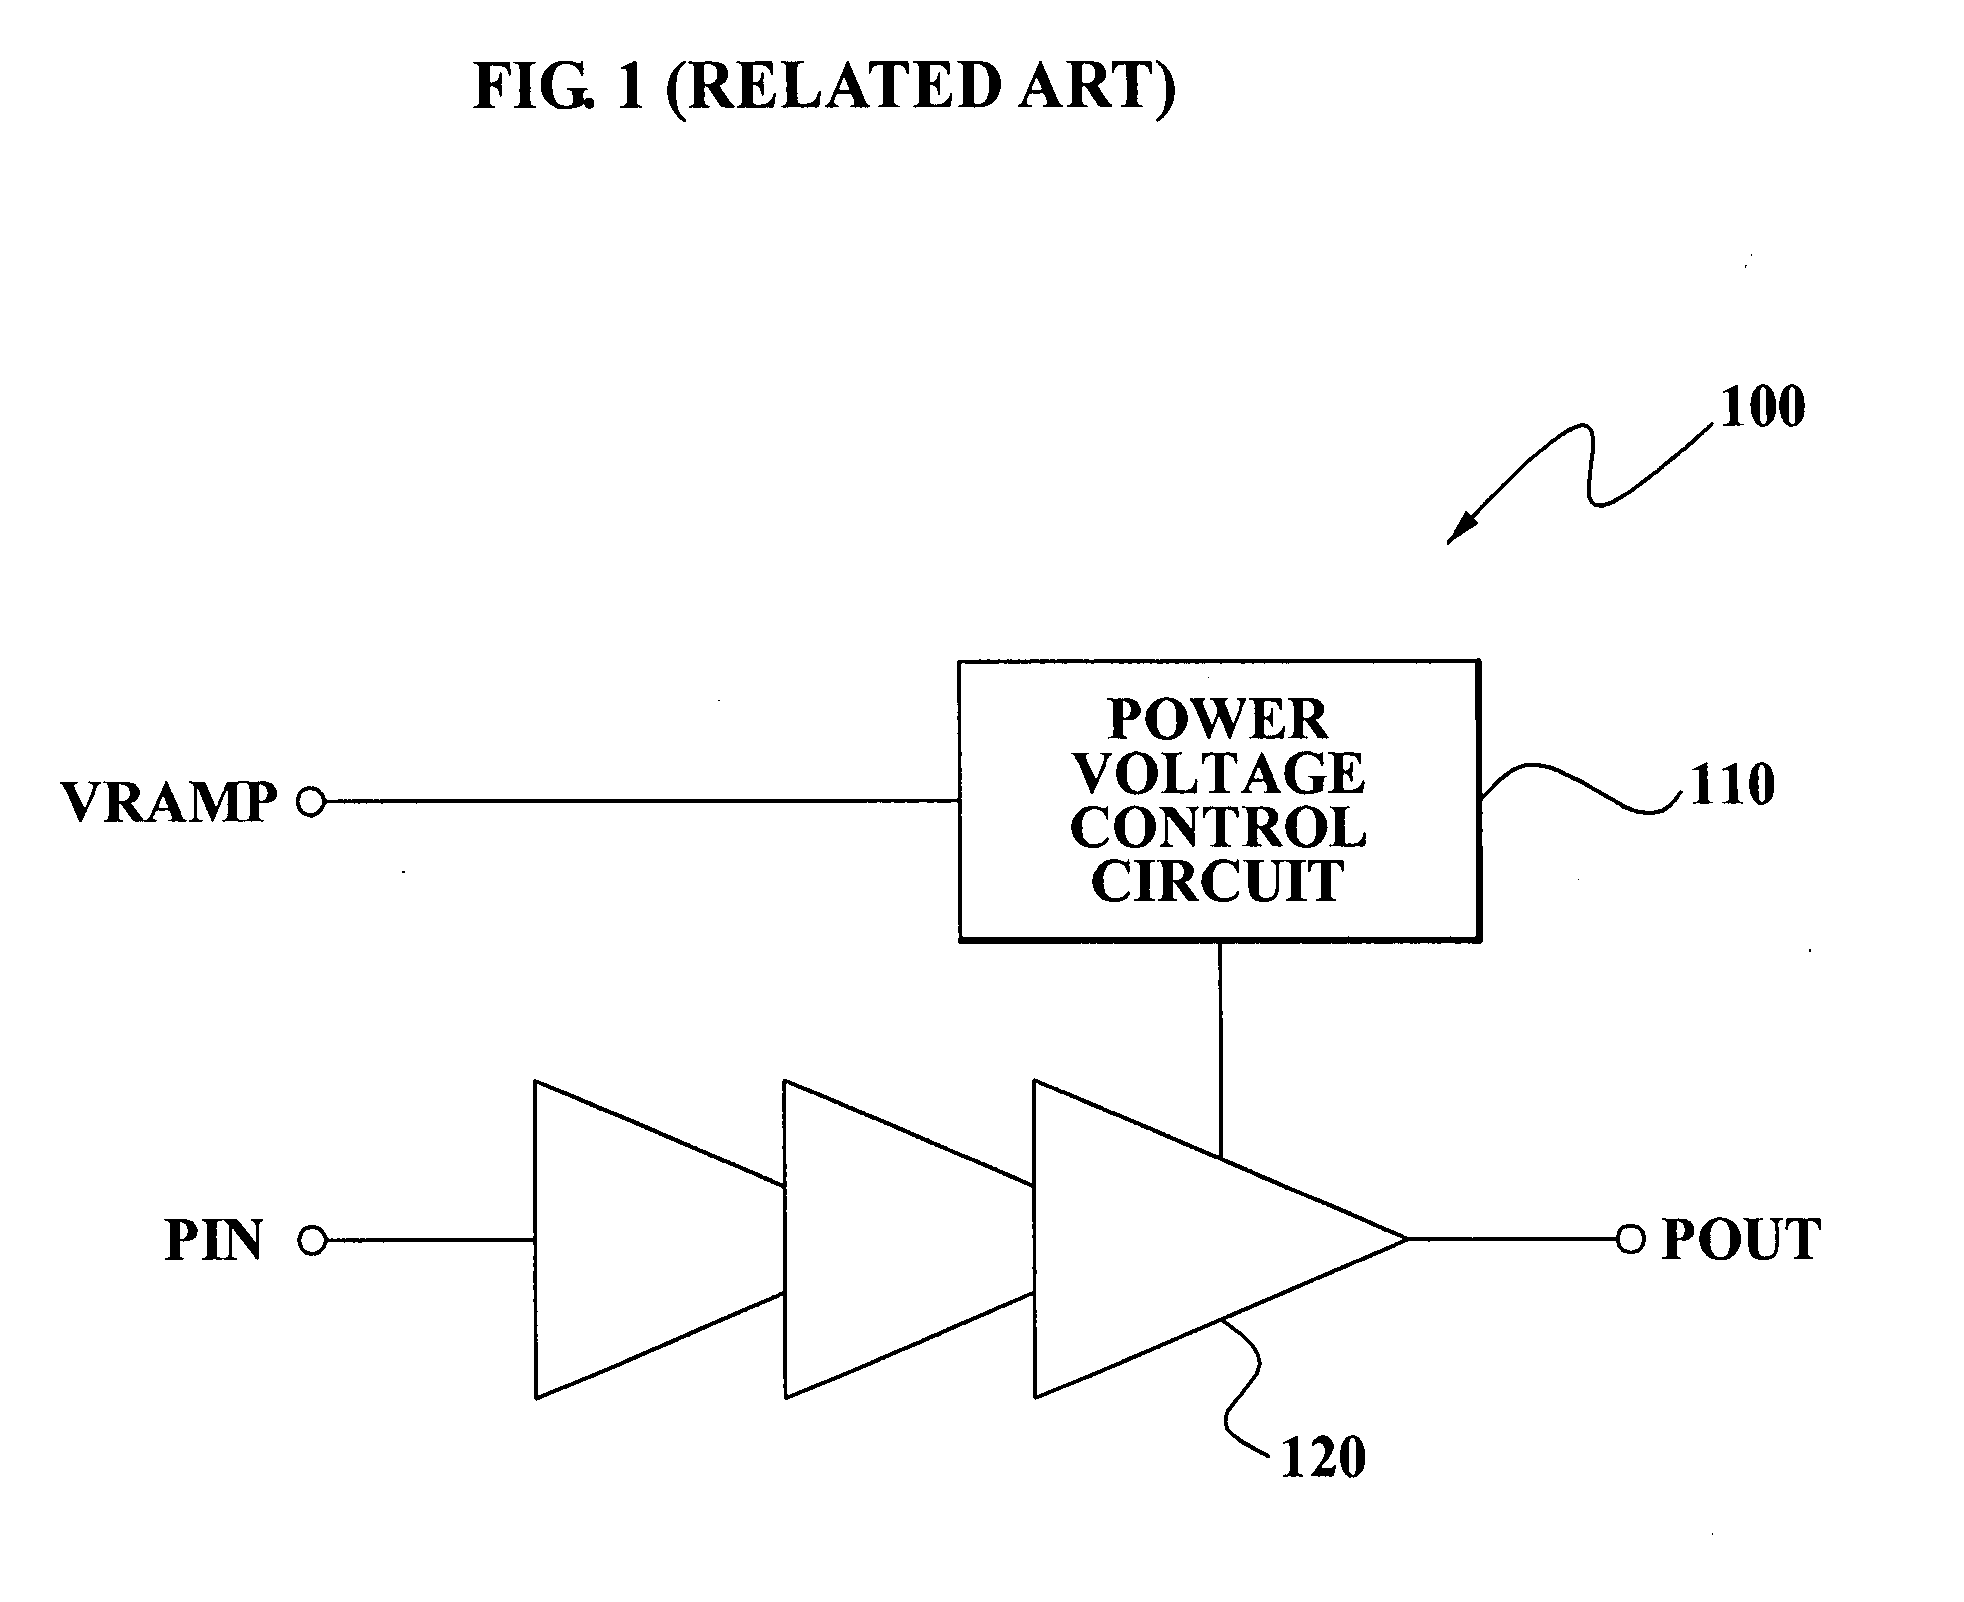 Power amplifier circuit for peak envelope modulation of high frequency signal